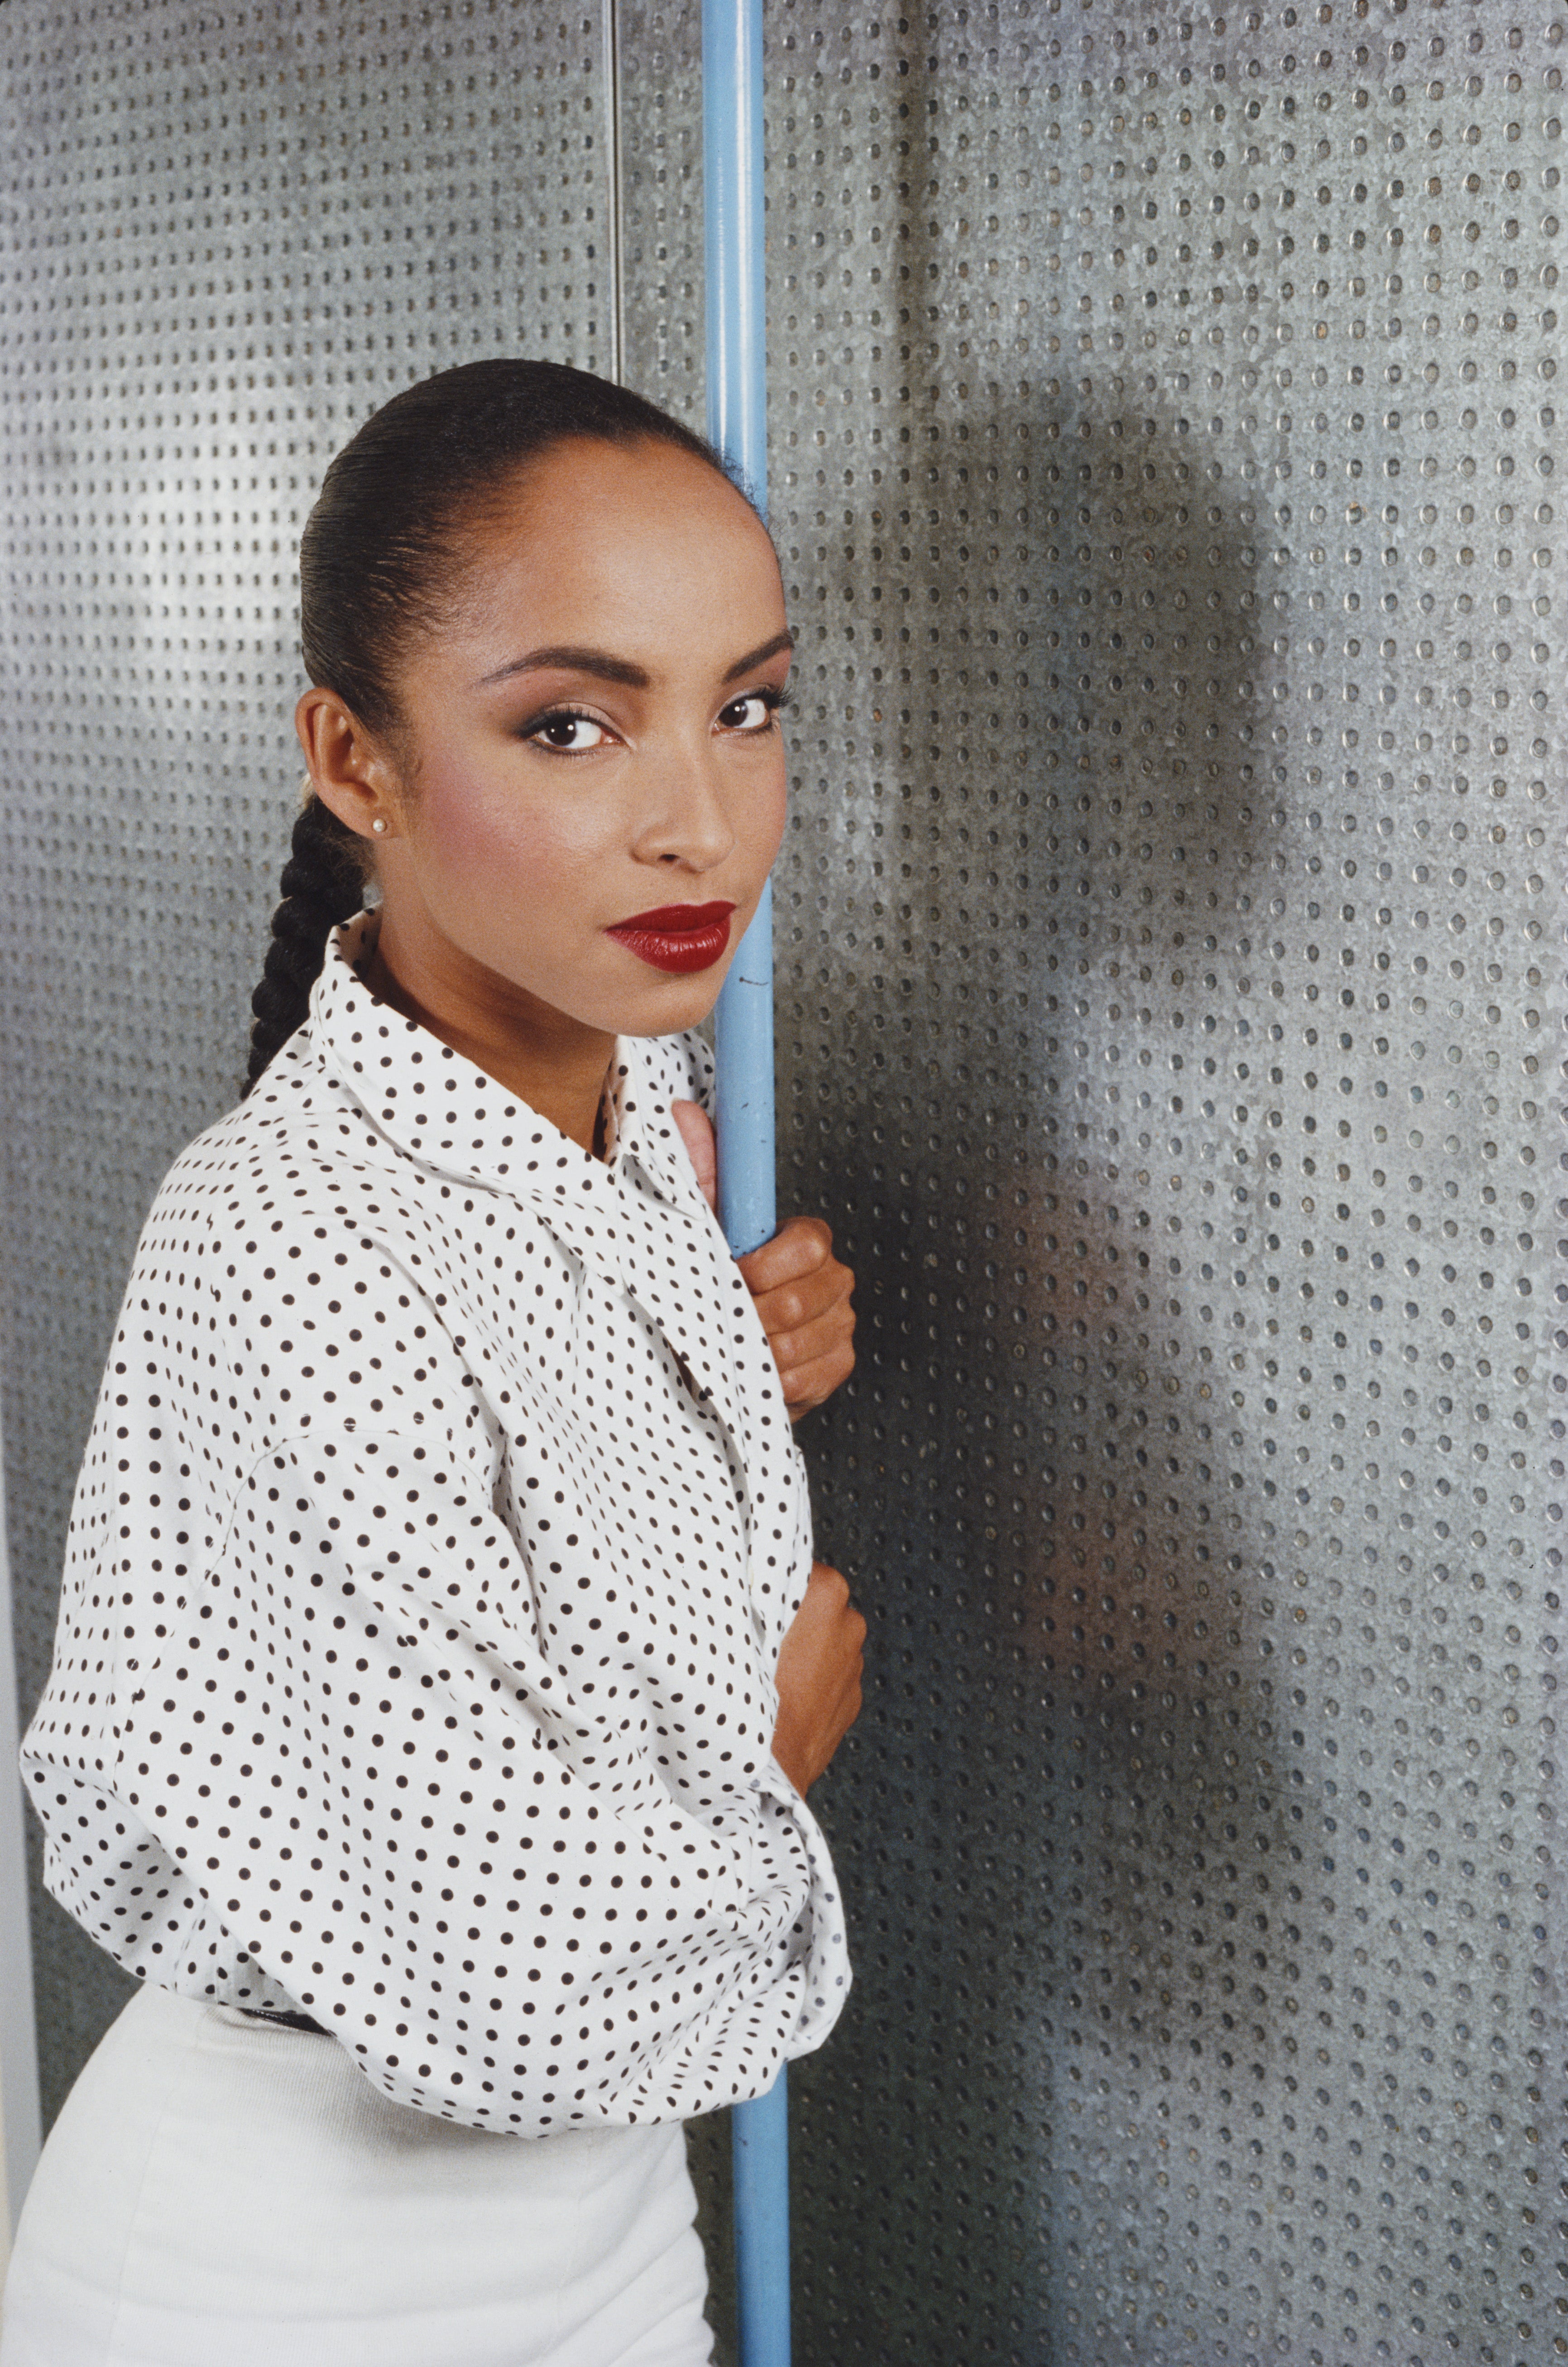 Sade Definitely Taught Black Girls How To Wear Red Lipstick
